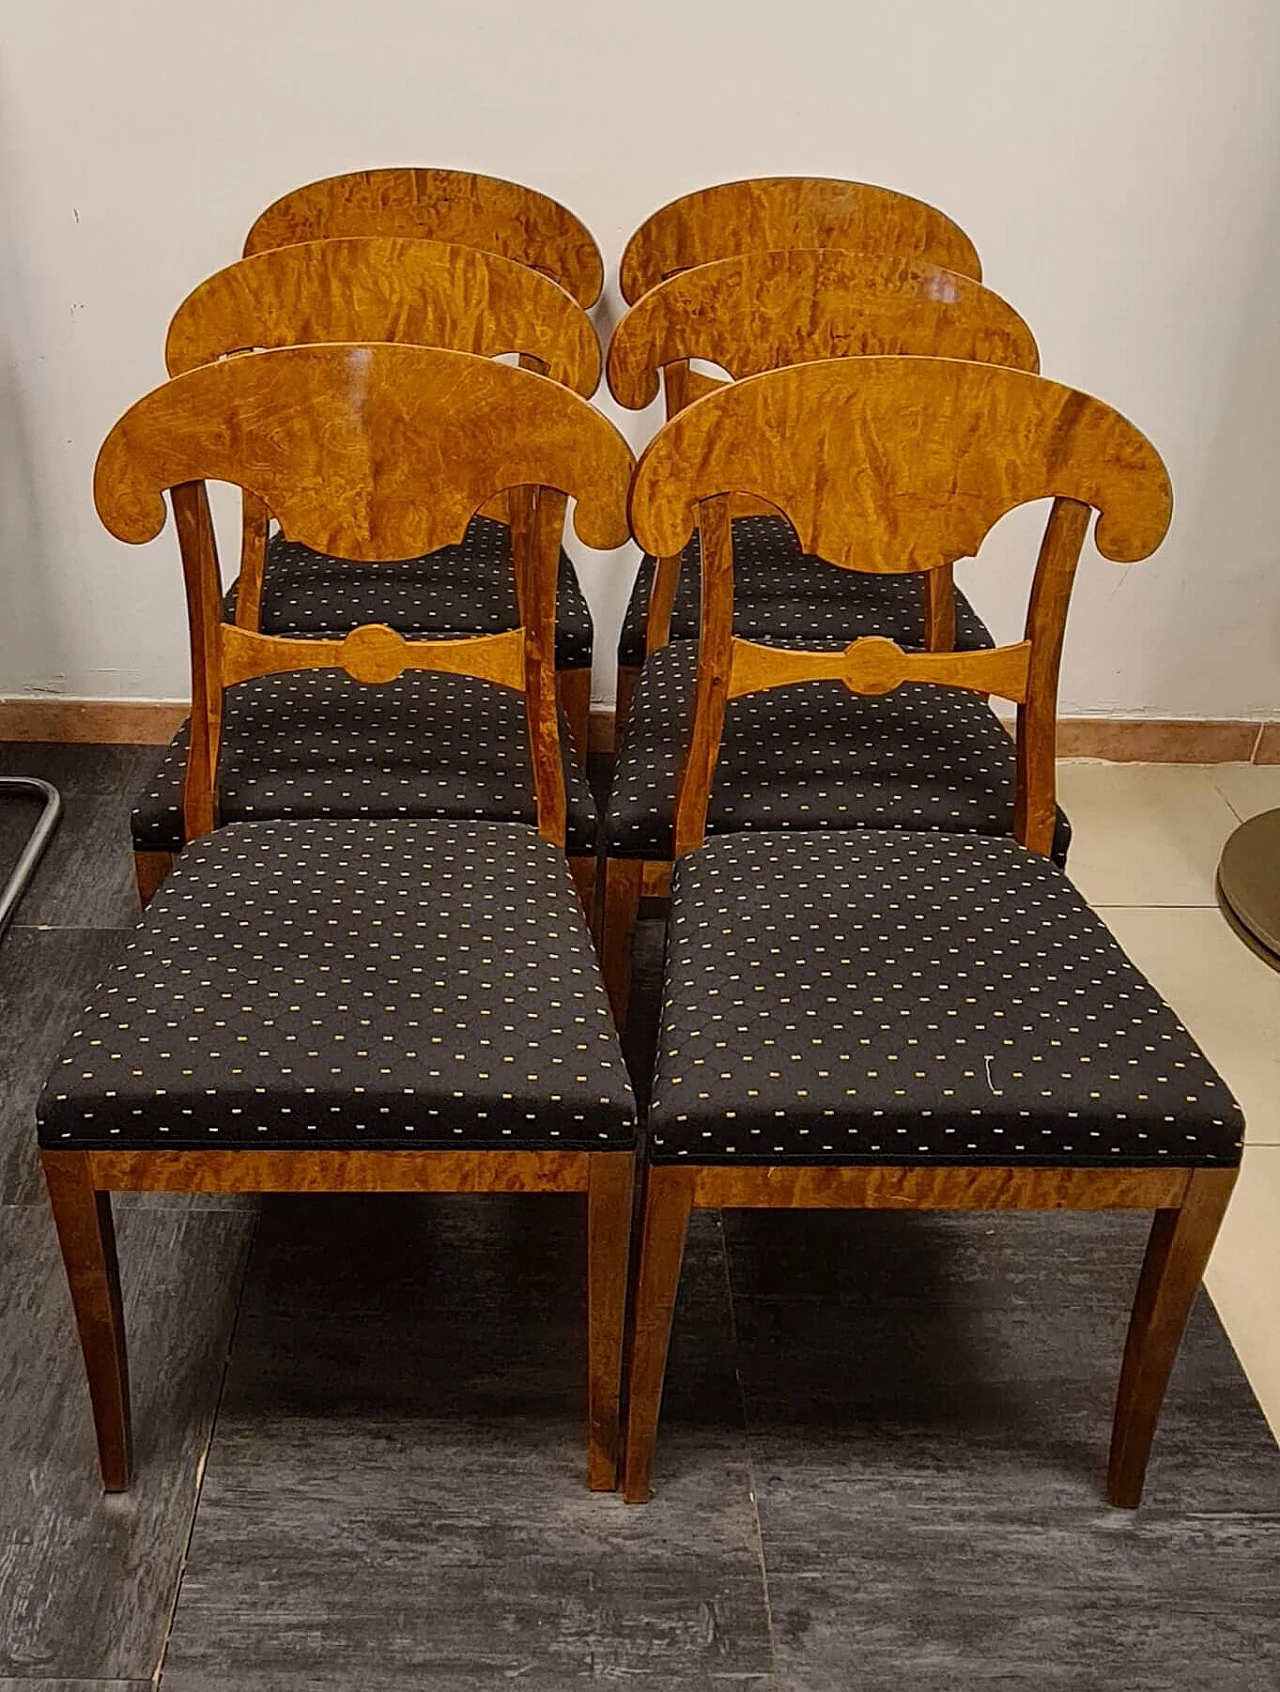 6 Biedermeier chairs and extendable table in blond walnut, 19th century 18